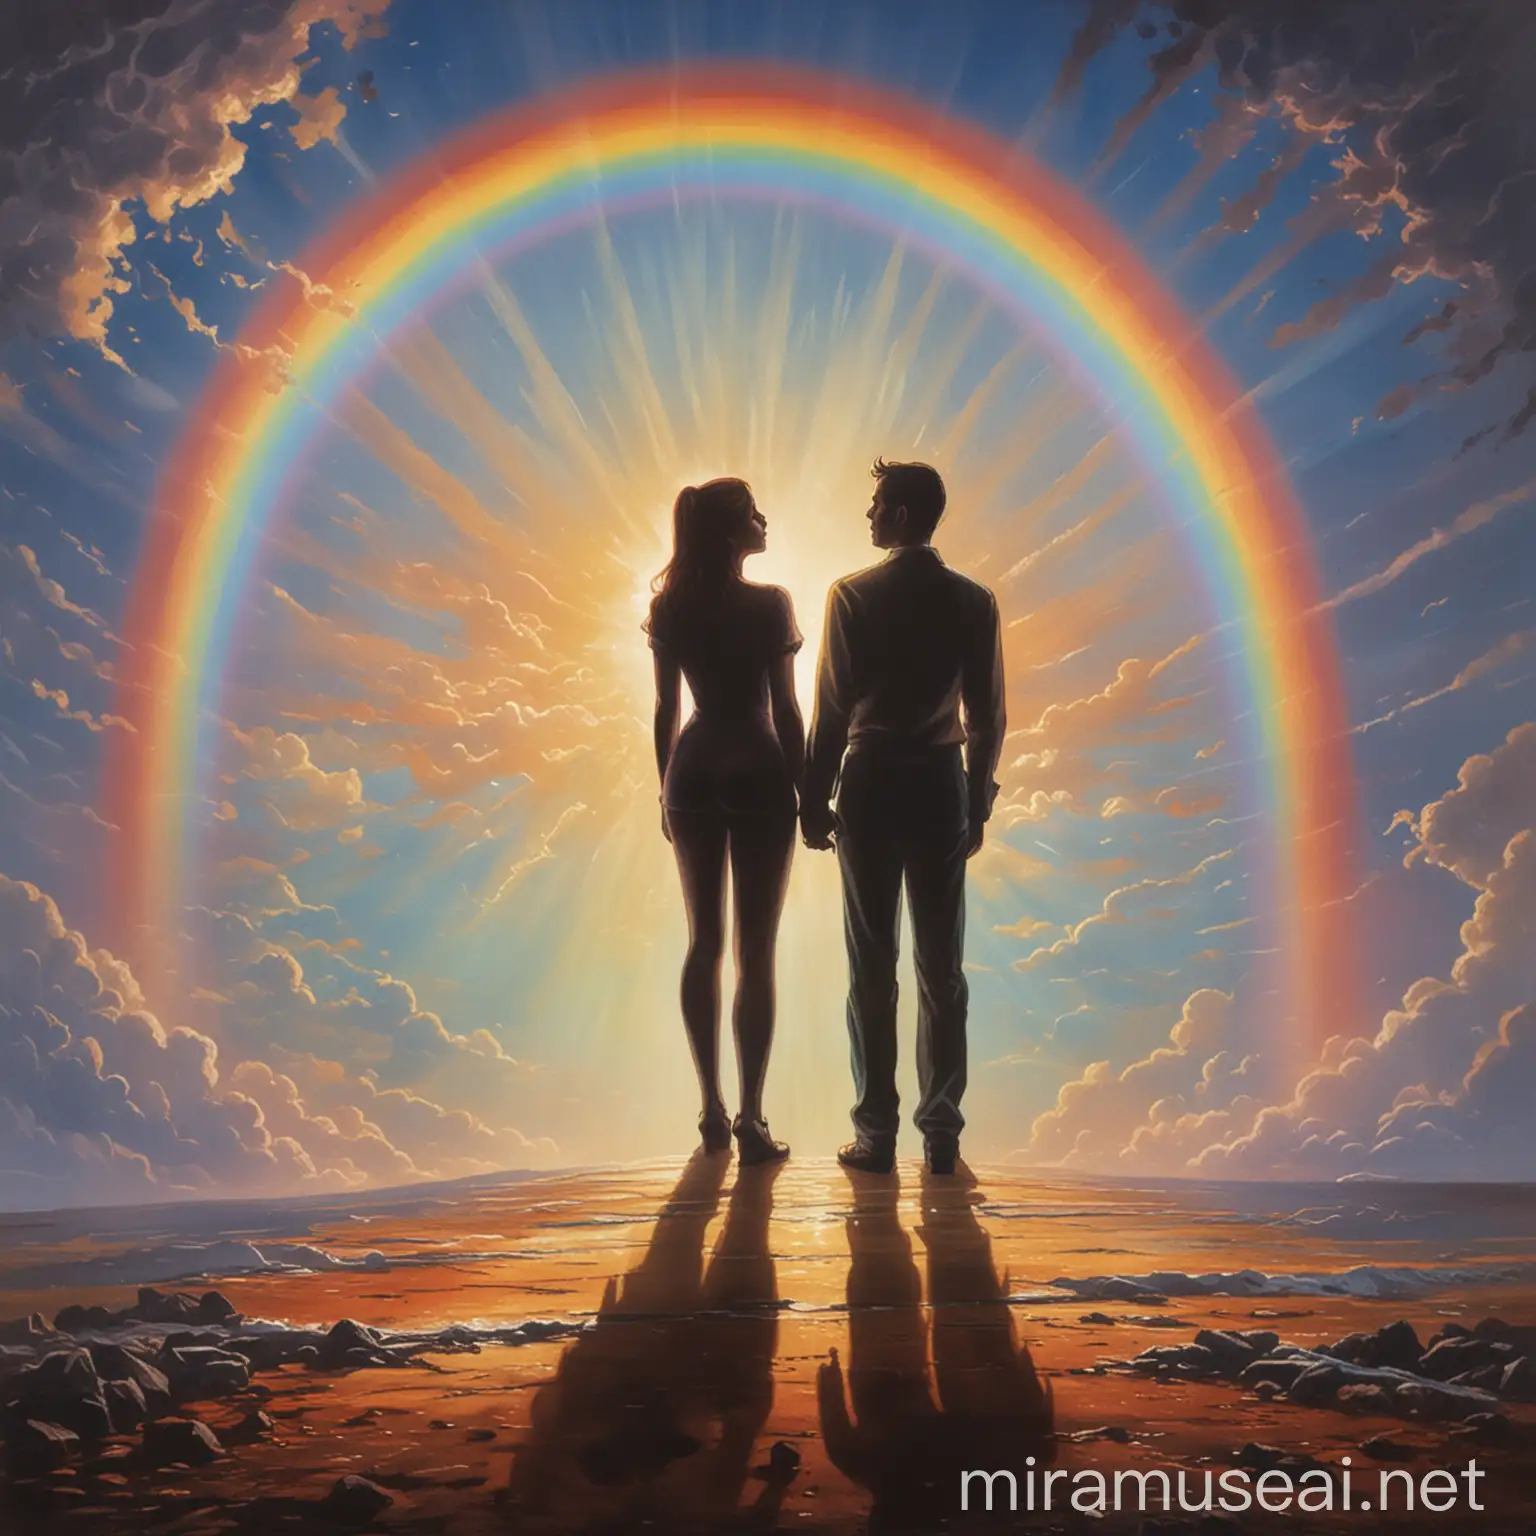 Silhouette of Man and Woman Under Rainbow Sky